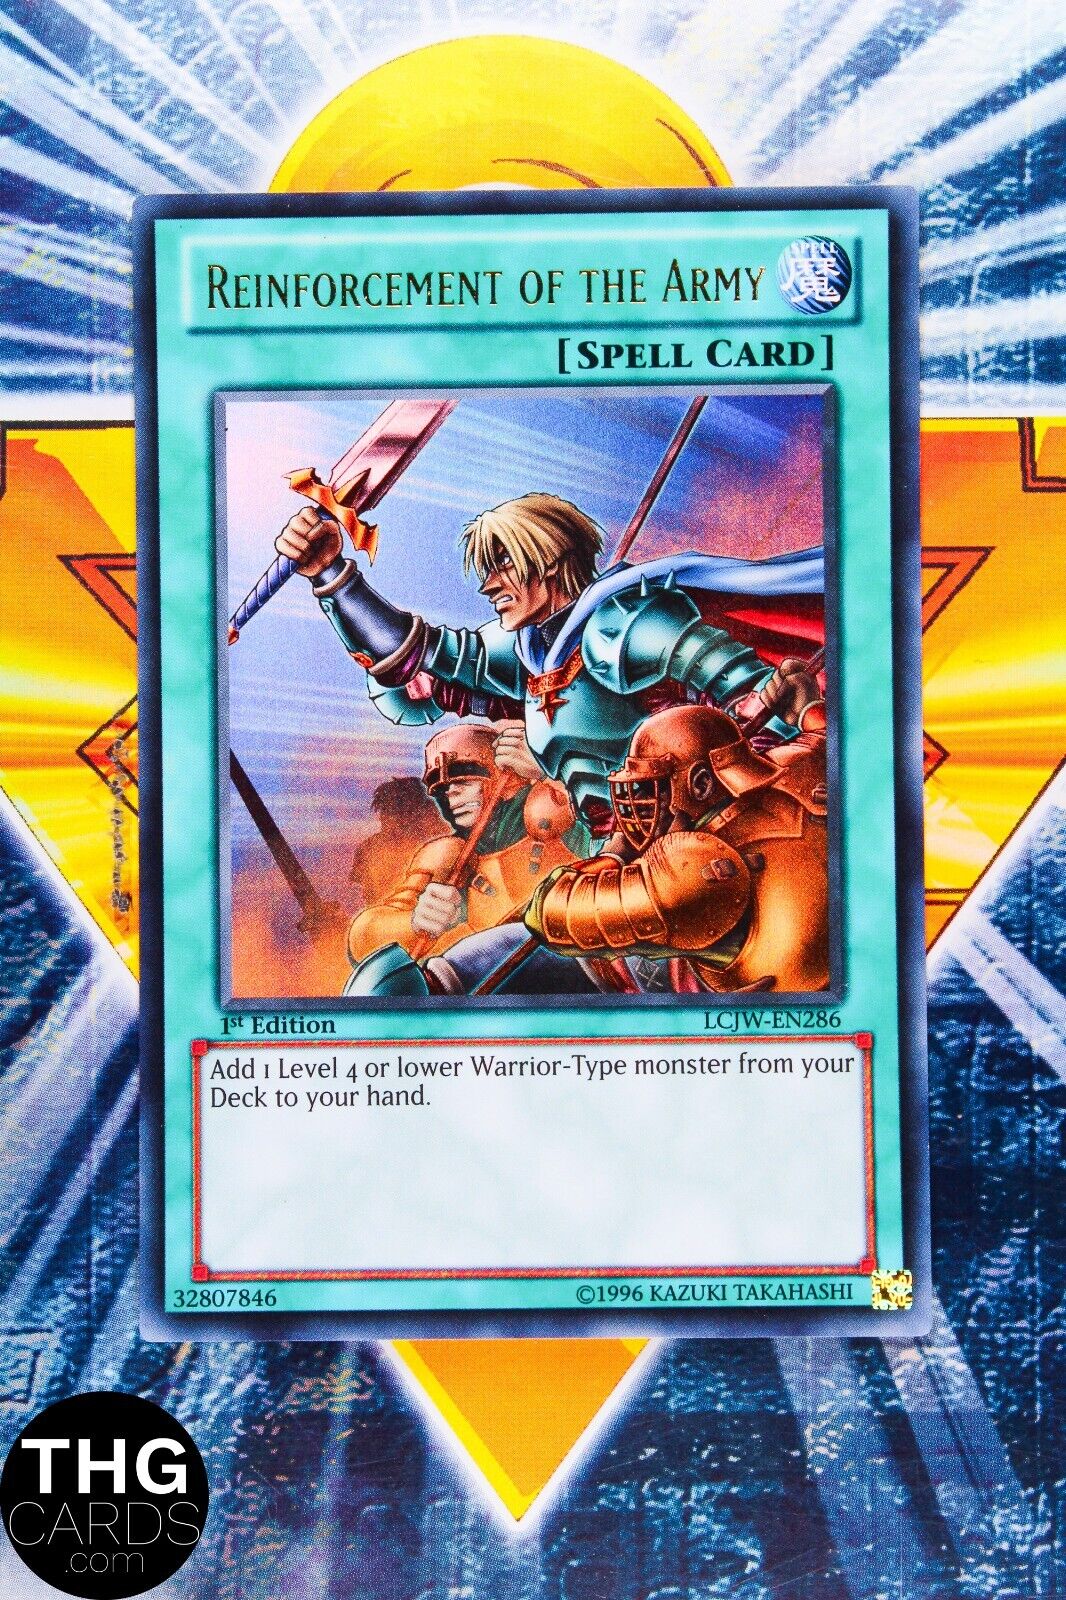 Reinforcement of the Army LCJW-EN286 1st Edition Ultra Rare Yugioh Card